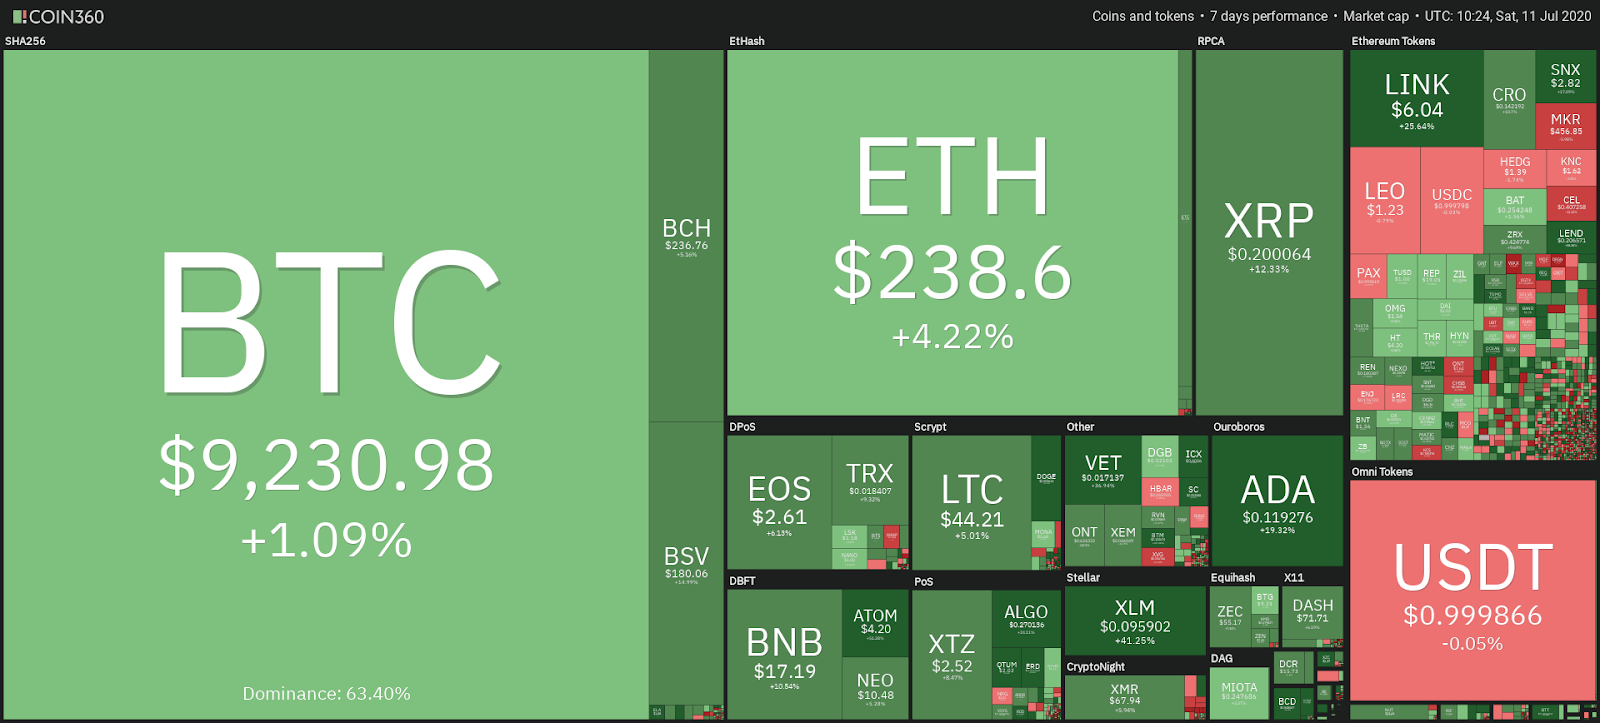 Cryptocurrency market performance in the past 7 days